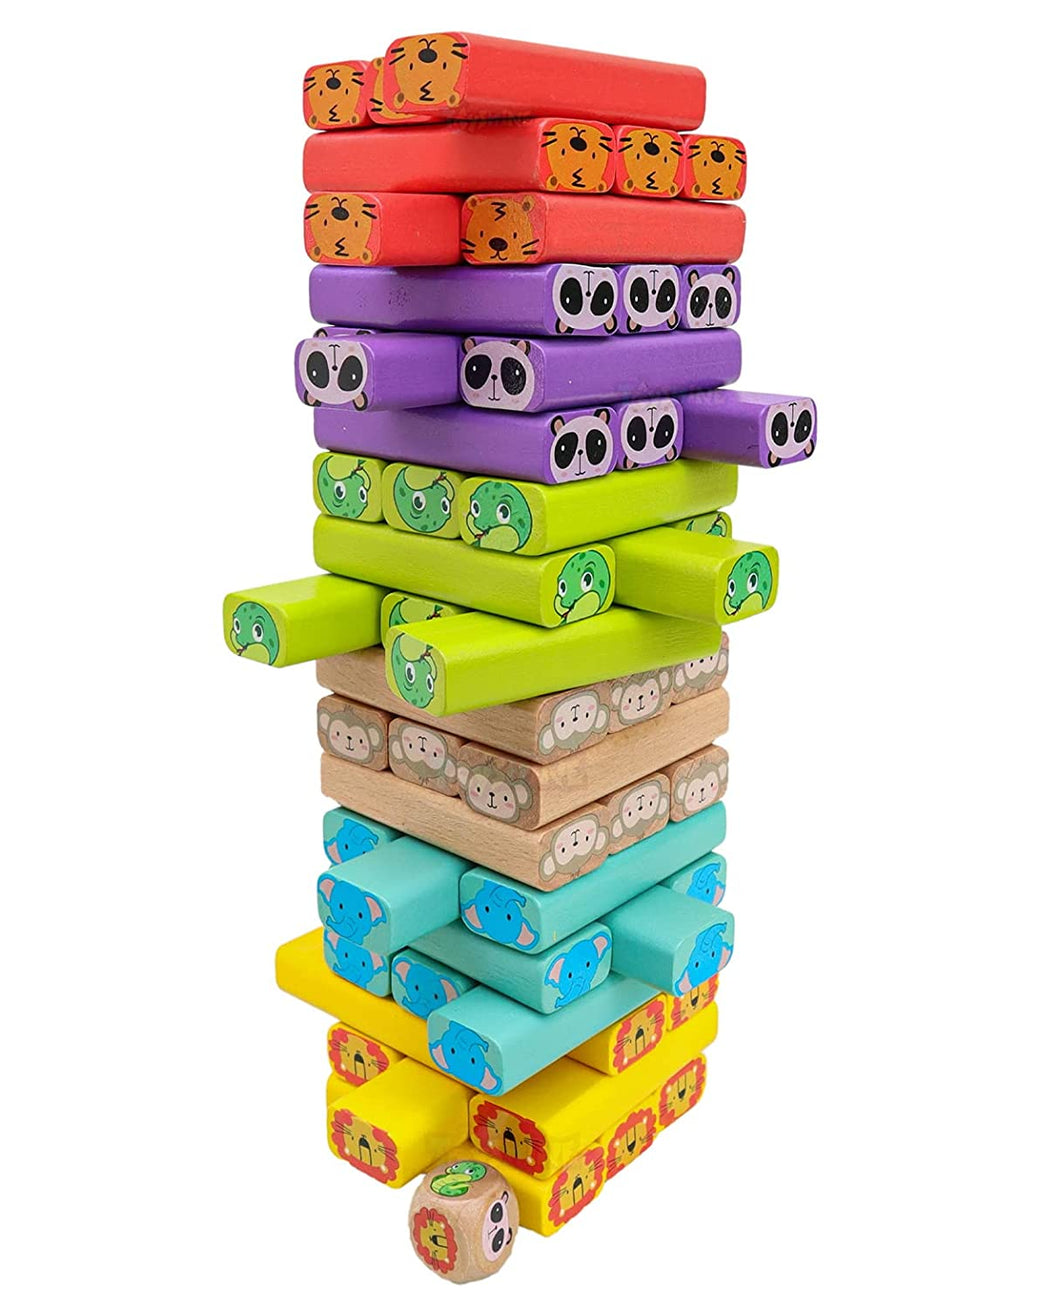 Toyshine Wooden Animal Tumbling Tower Game | Colored Wooden Blocks Stacking Board Games for Kids Ages 4-8